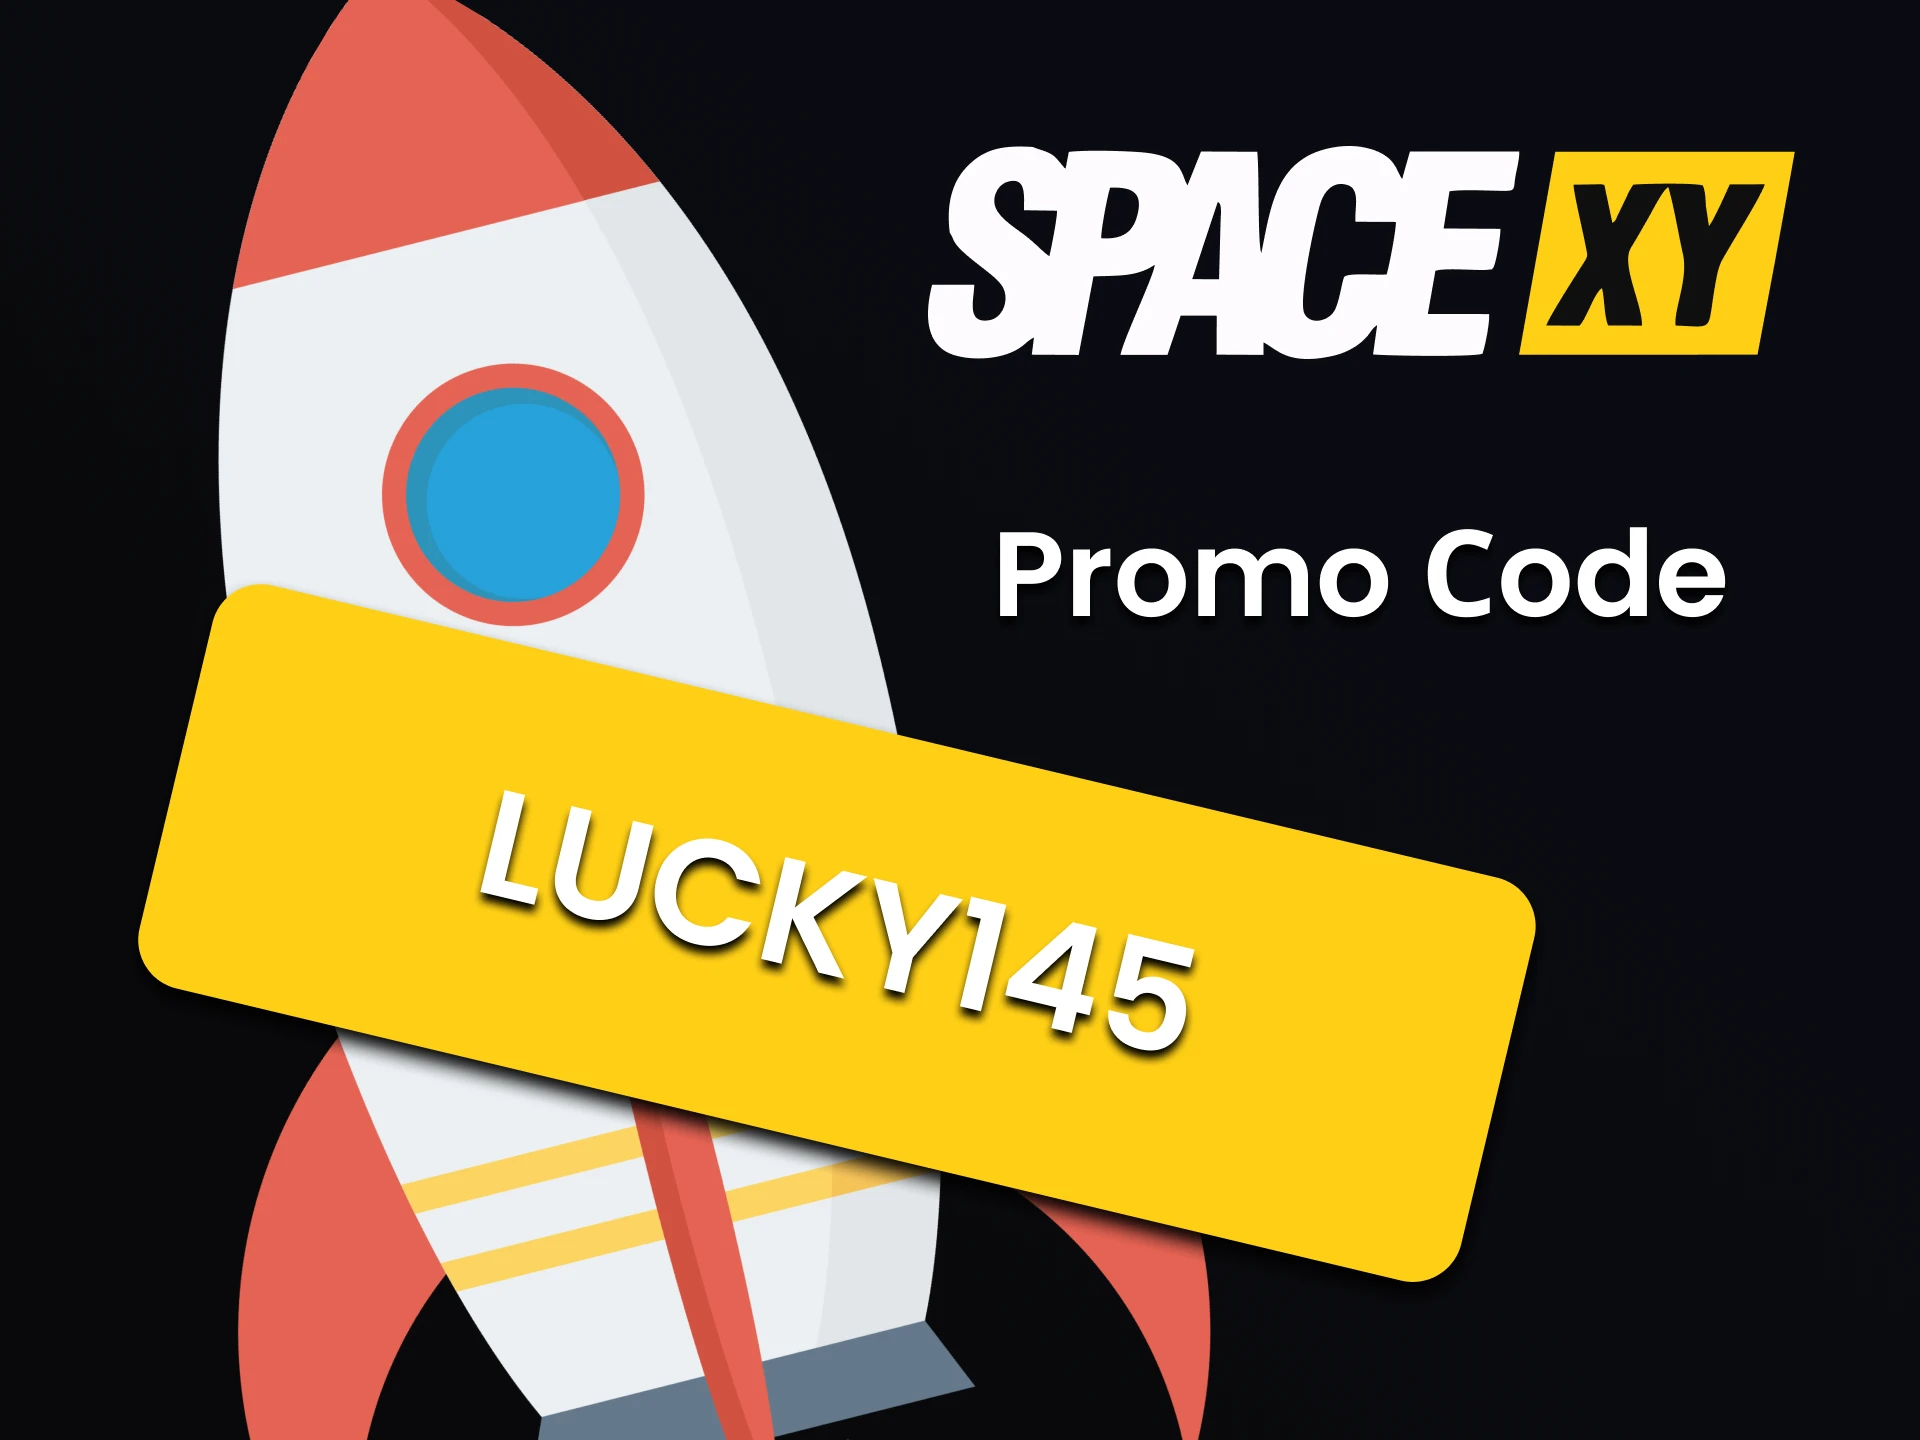 Use promo code to play Space XY.